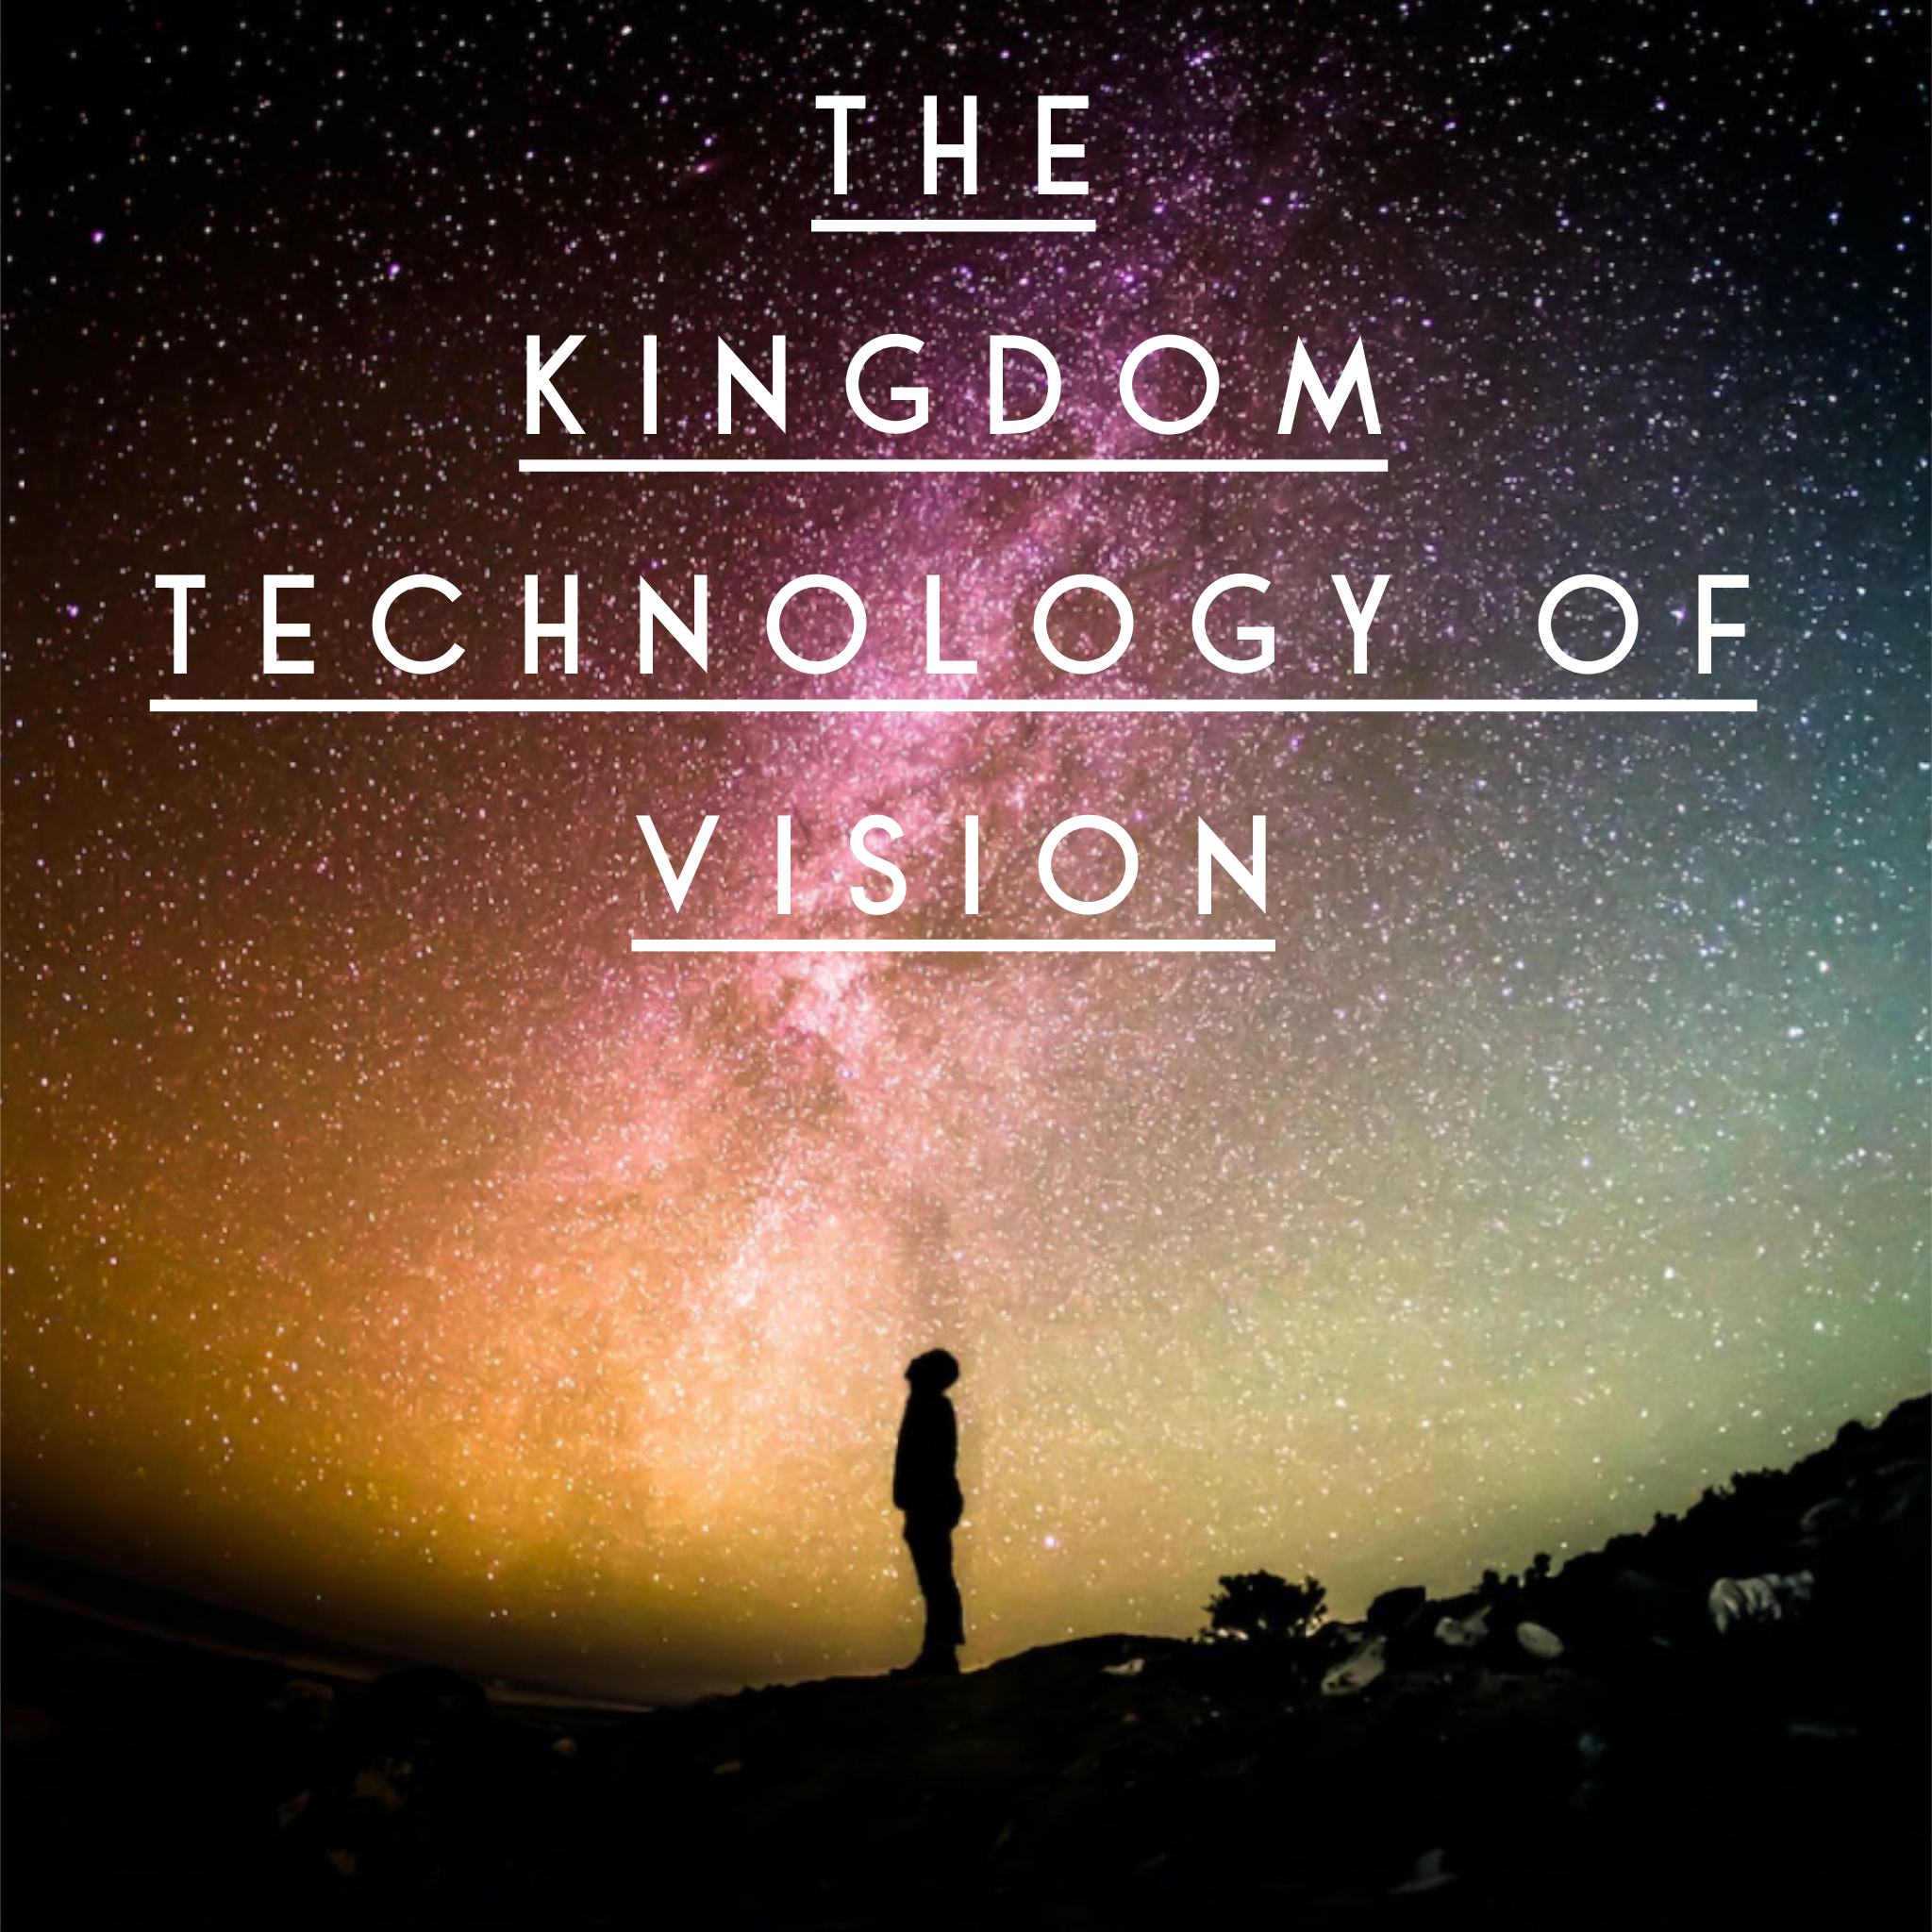 The Kingdom Technology of Vision - 10/2/22